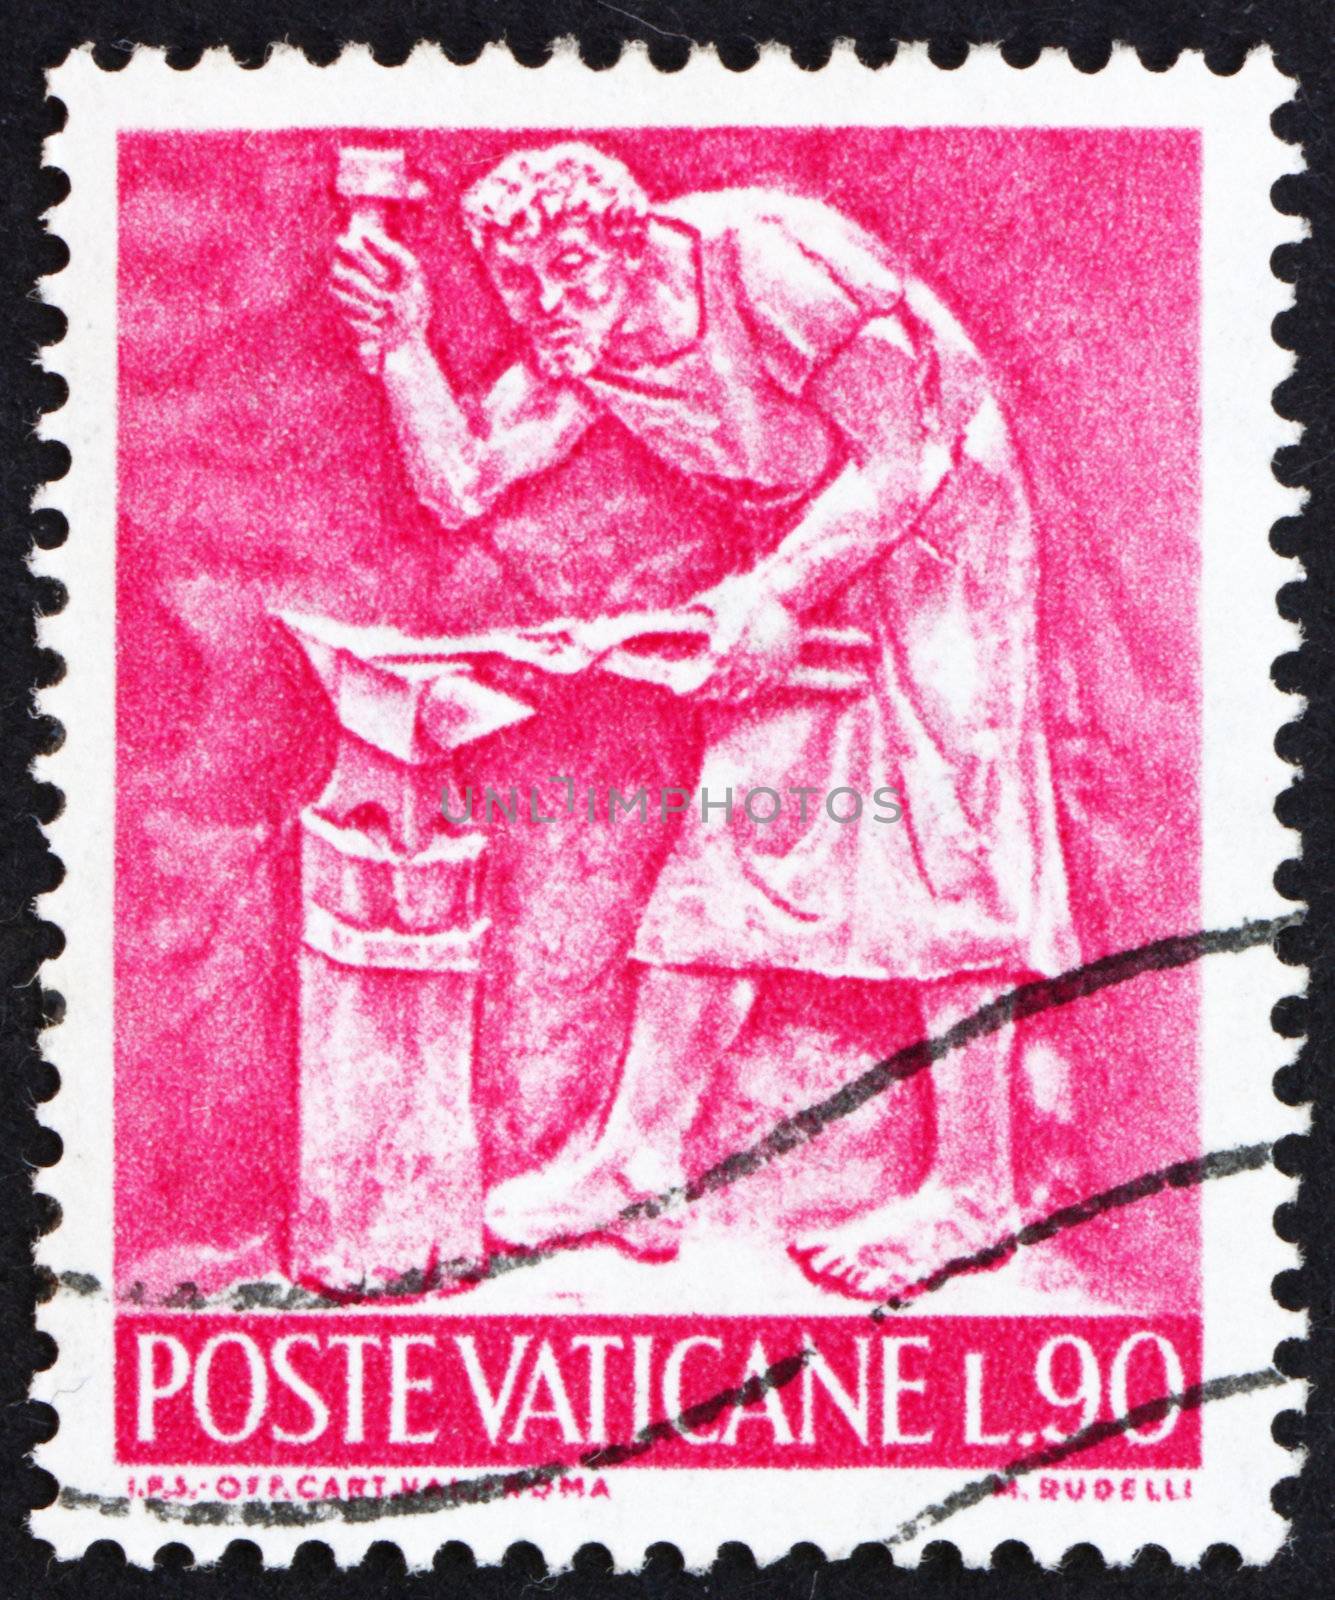 VATICAN - CIRCA 1966: a stamp printed in the Vatican shows Pope Paul VI, Blacksmith, Bas-relief by Mario Rudelli from the Chair in the Pope's Private Chapel, circa 1966